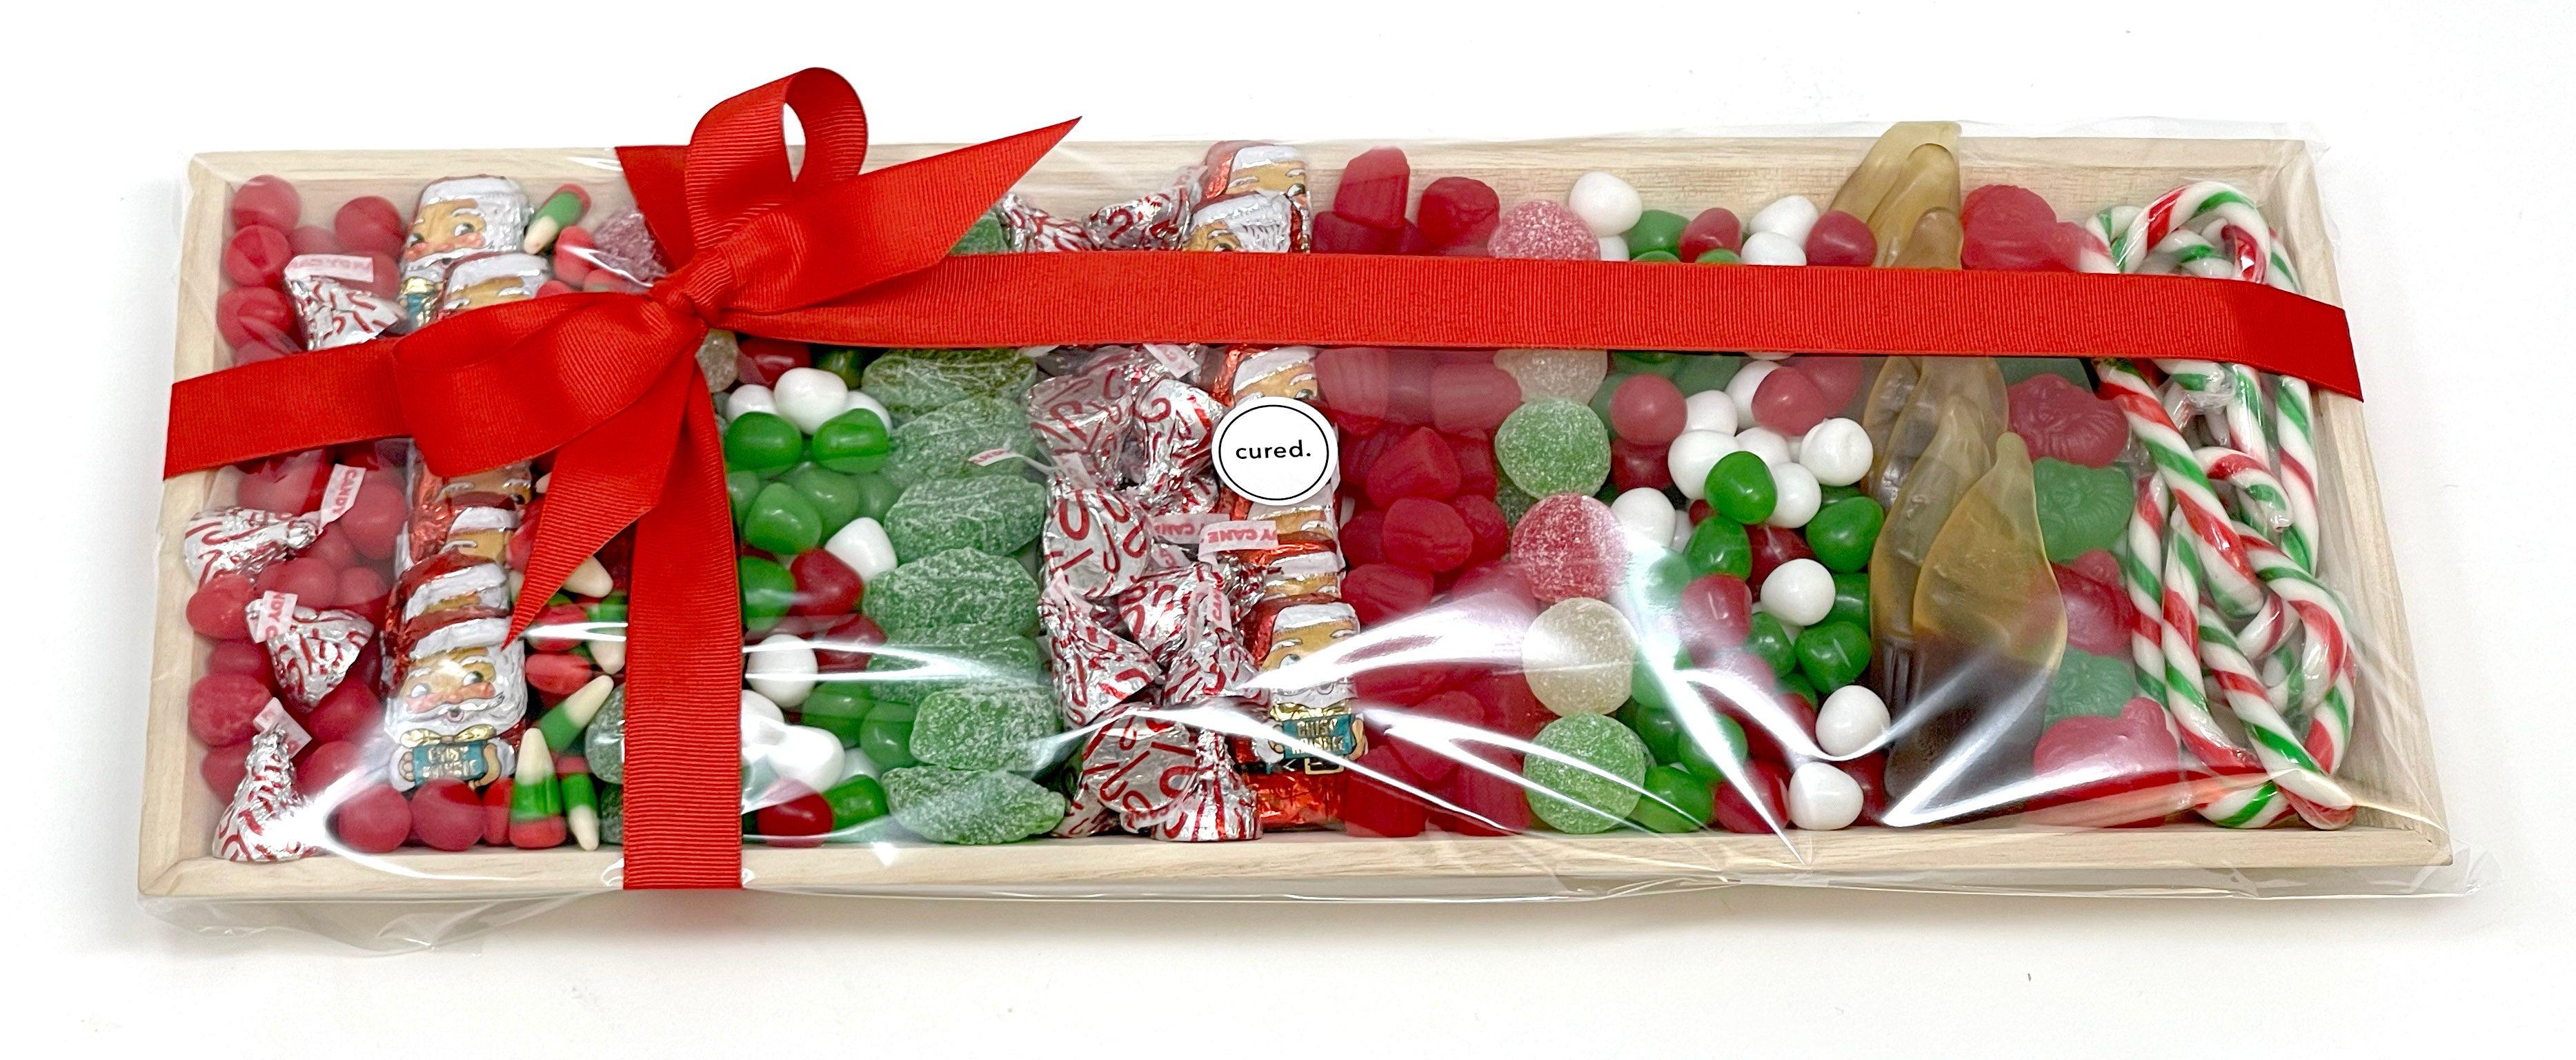 Christmas Candy Tray-Charcuterie-Corporate Catering Toronto-Best Charcuterie-Catering Toronto-Cured Catering